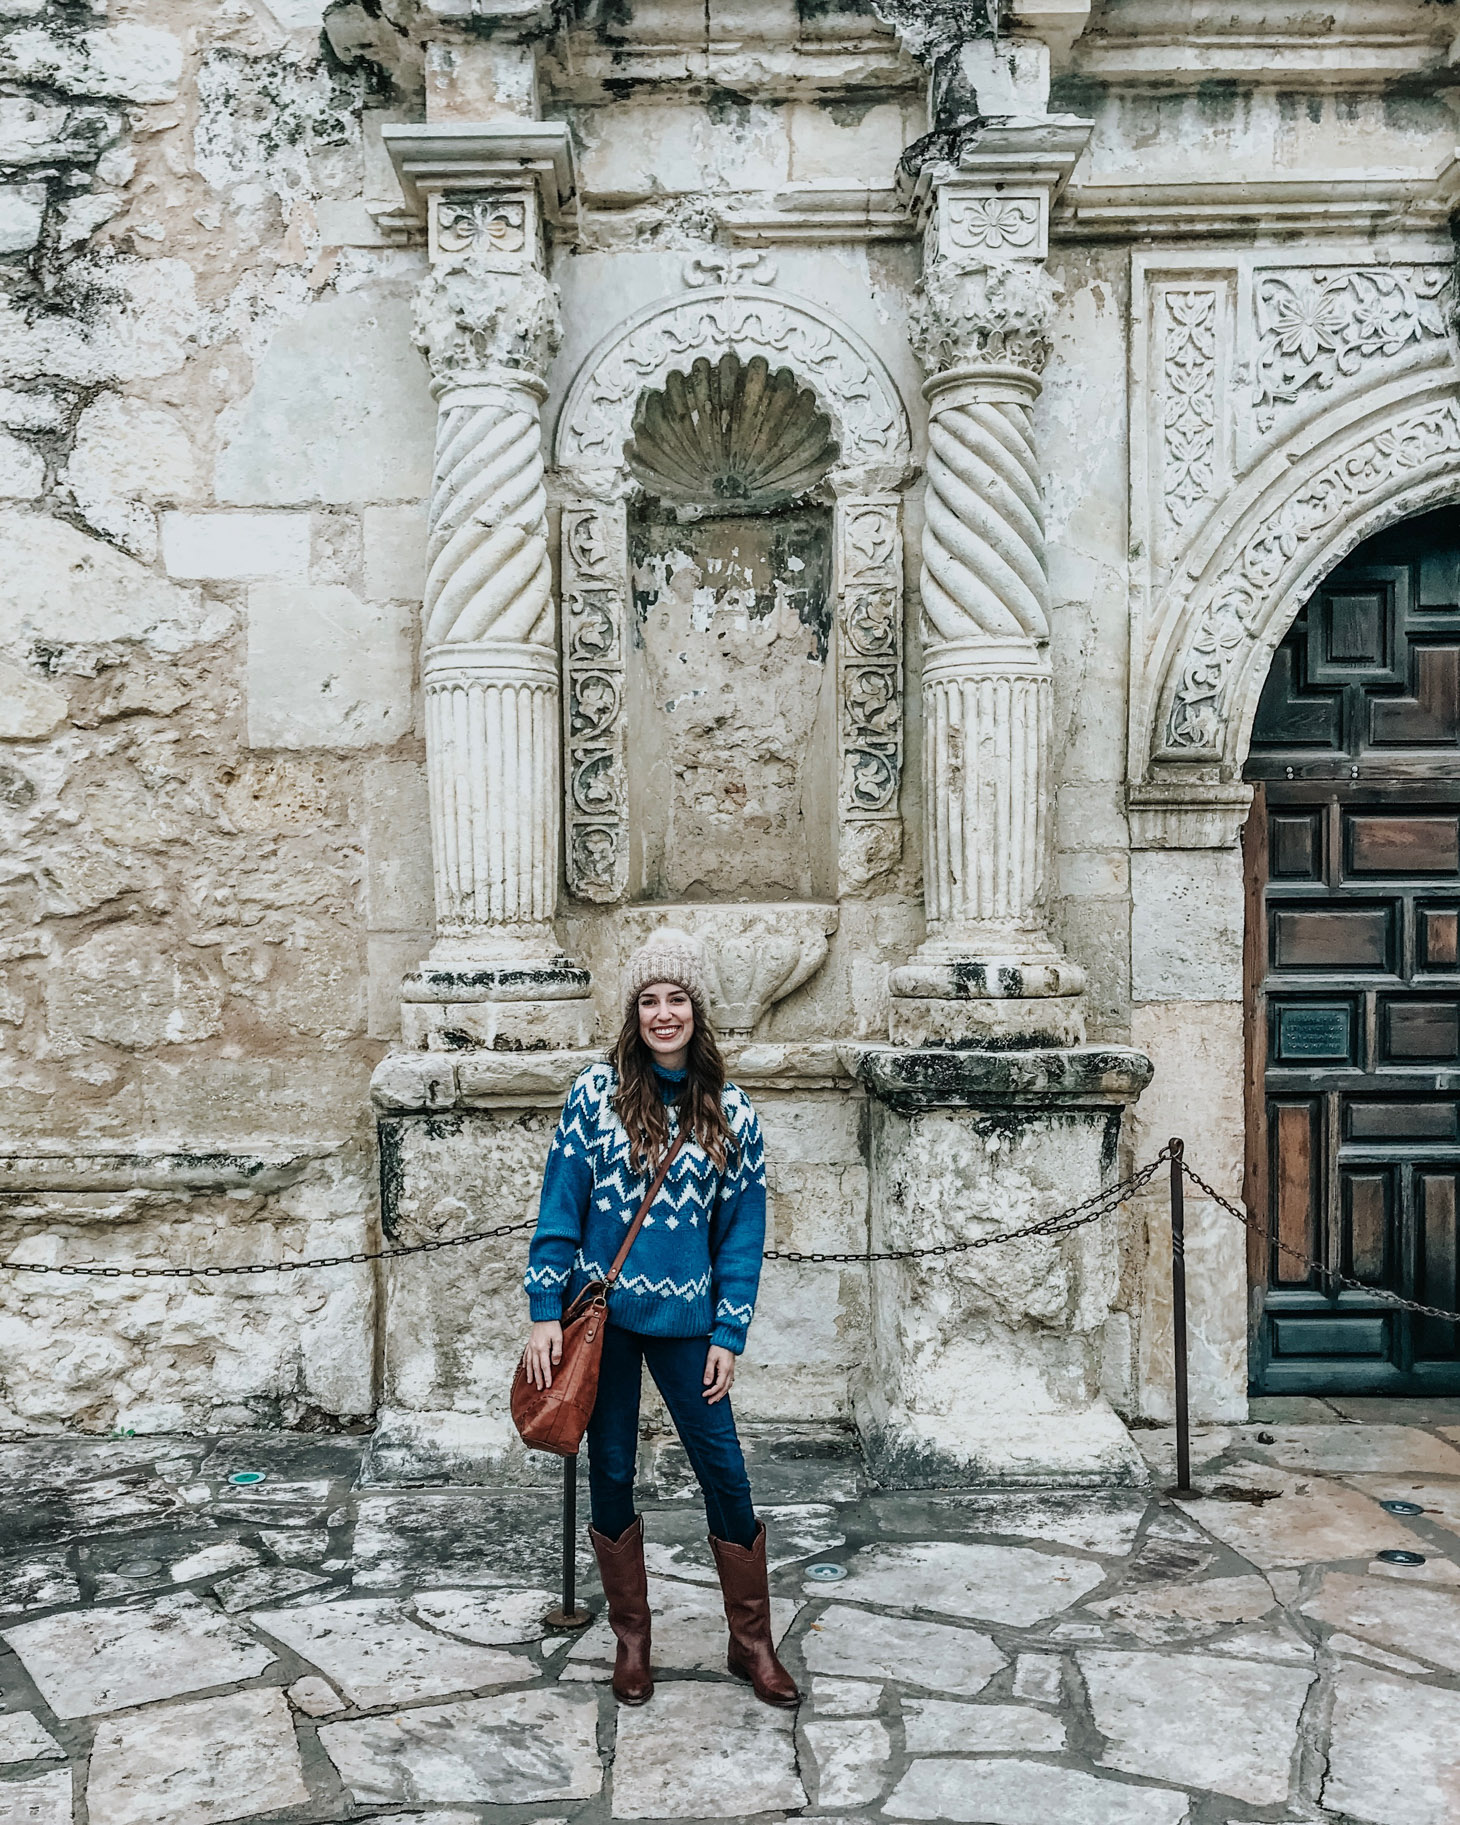 San Antonio in Winter featured by top US travel blog Lone Star Looking Glass; Image of woman wearing blue sweater and boots.